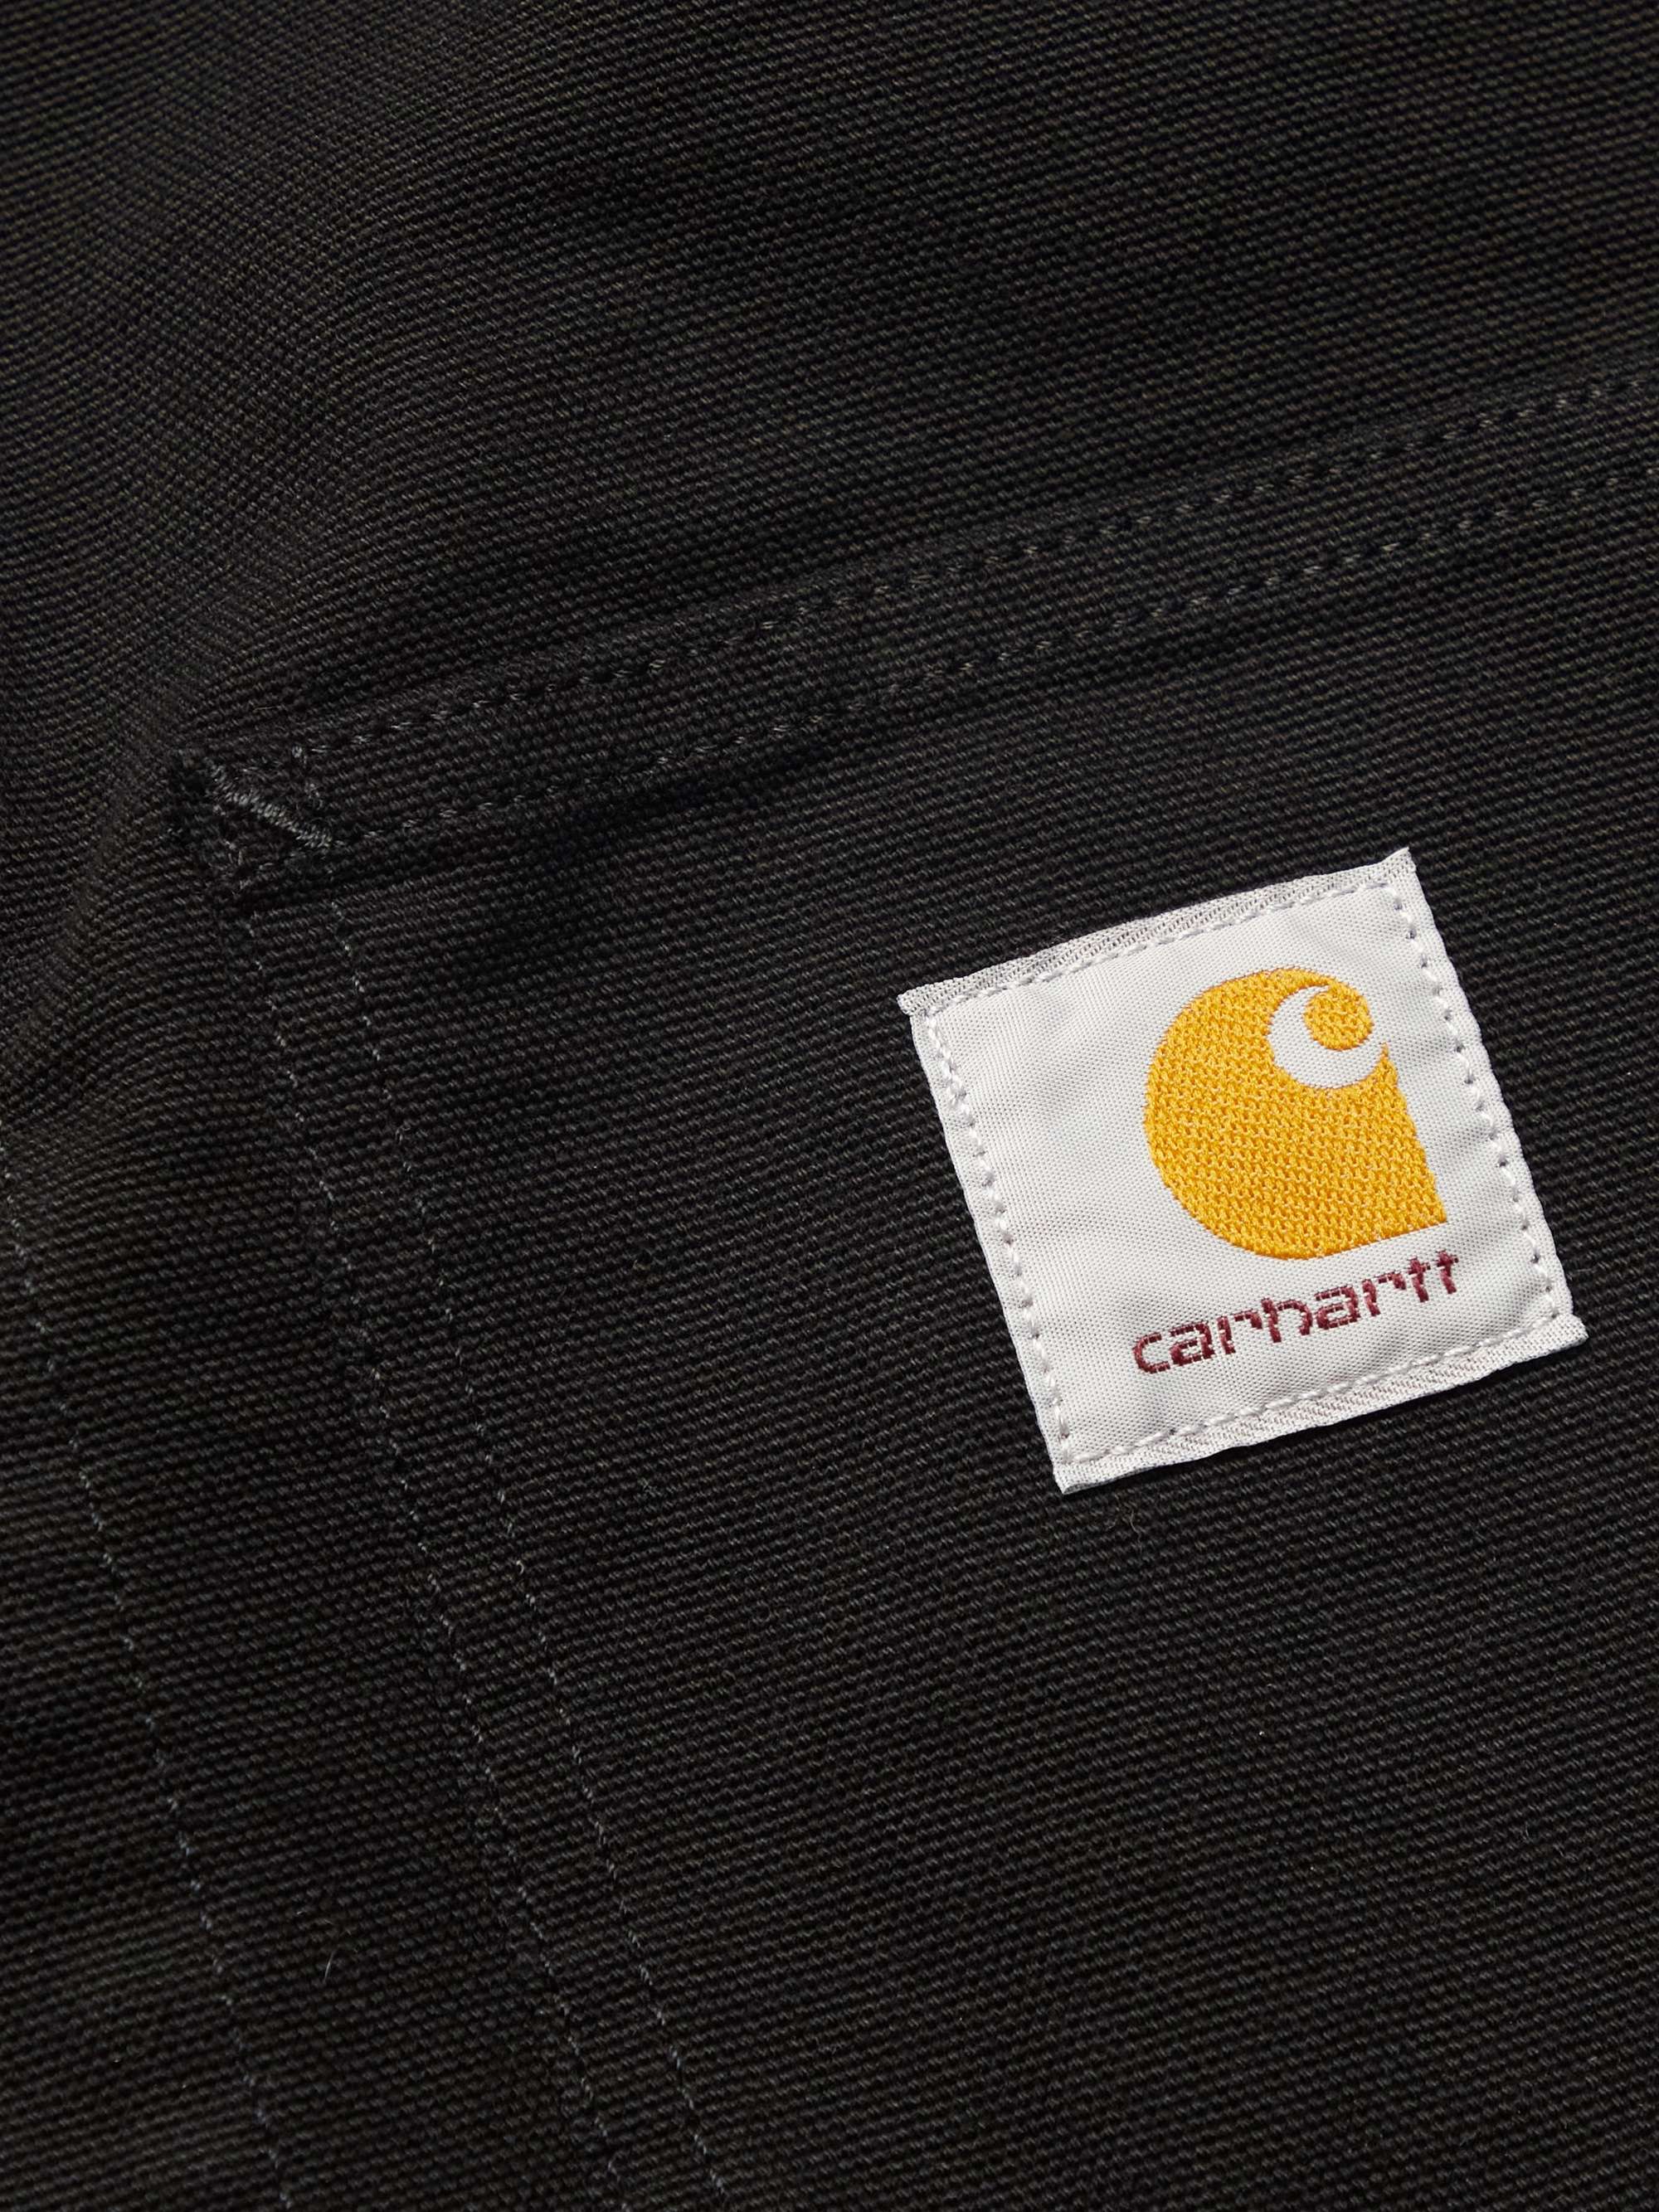 Carhartt WIP Michigan Corduroy-trimmed Organic Cotton-canvas Chore Jacket in Black for Men Mens Clothing Jackets Casual jackets 